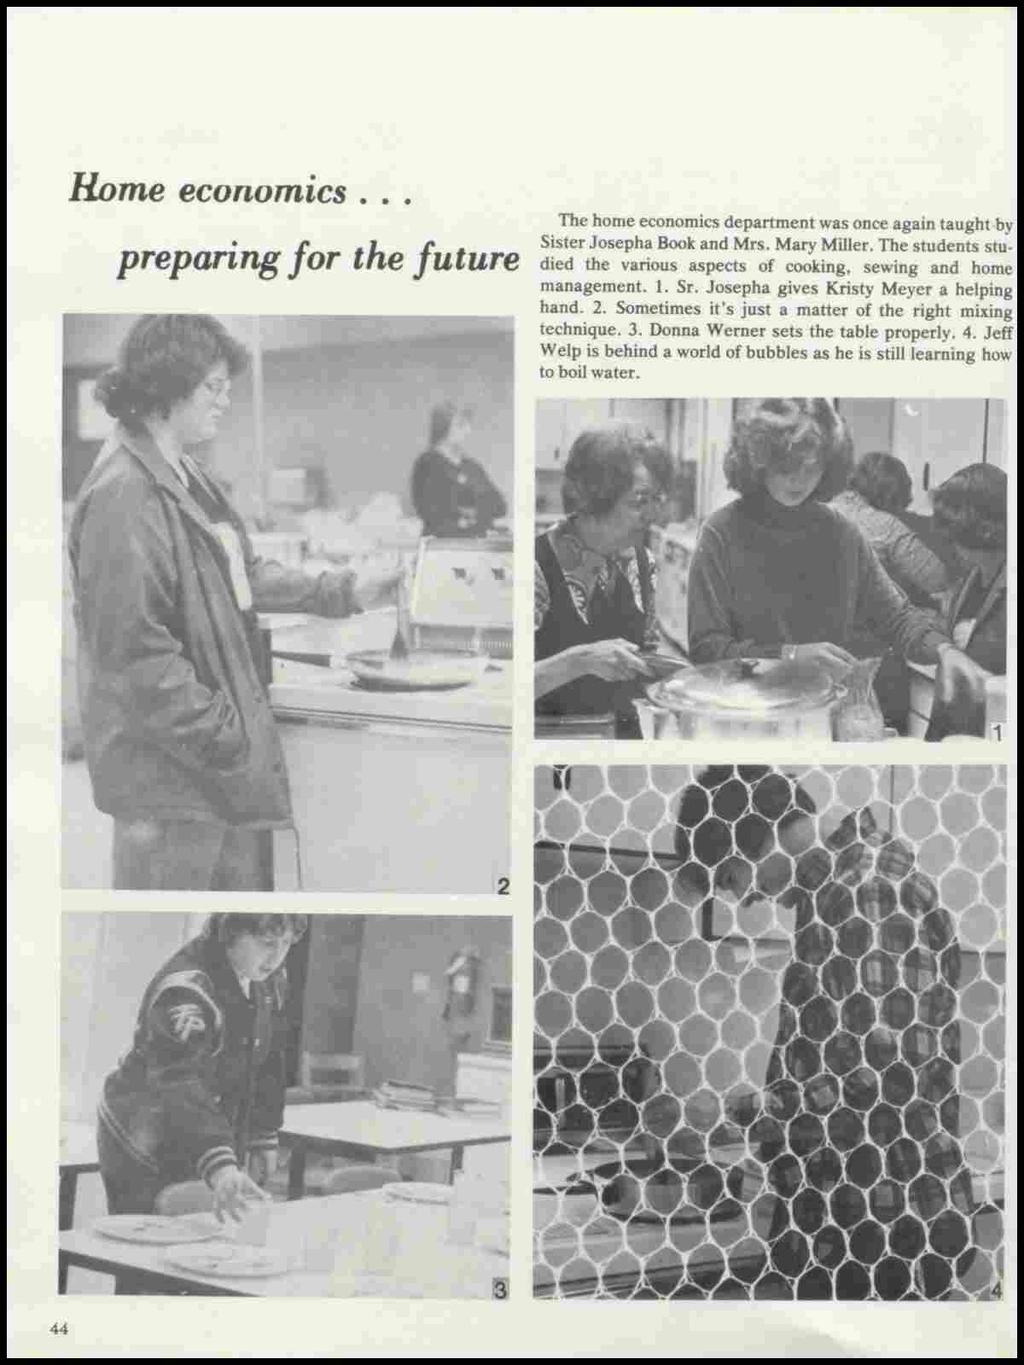 Home economics preparing for the future The home economics department was once again taught by Sister Josepha Book and Mrs. Mary Miller.